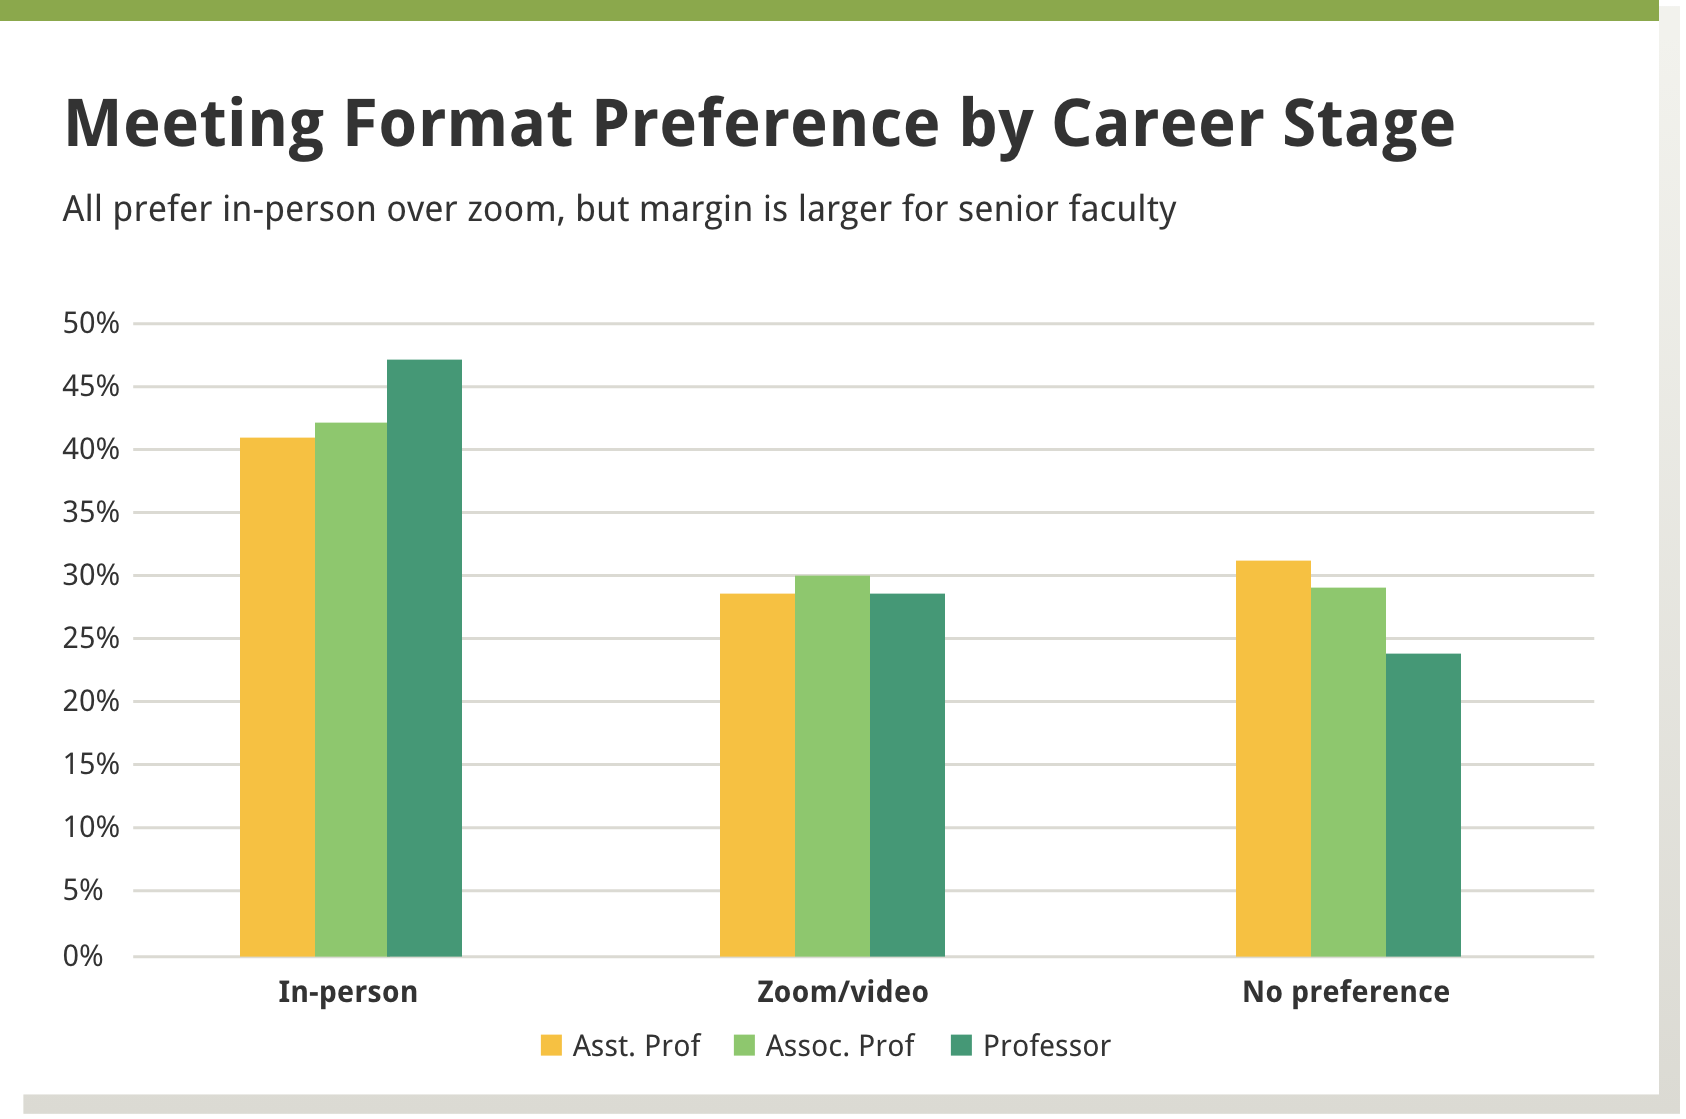 Meeting Format Preference by Career Stage